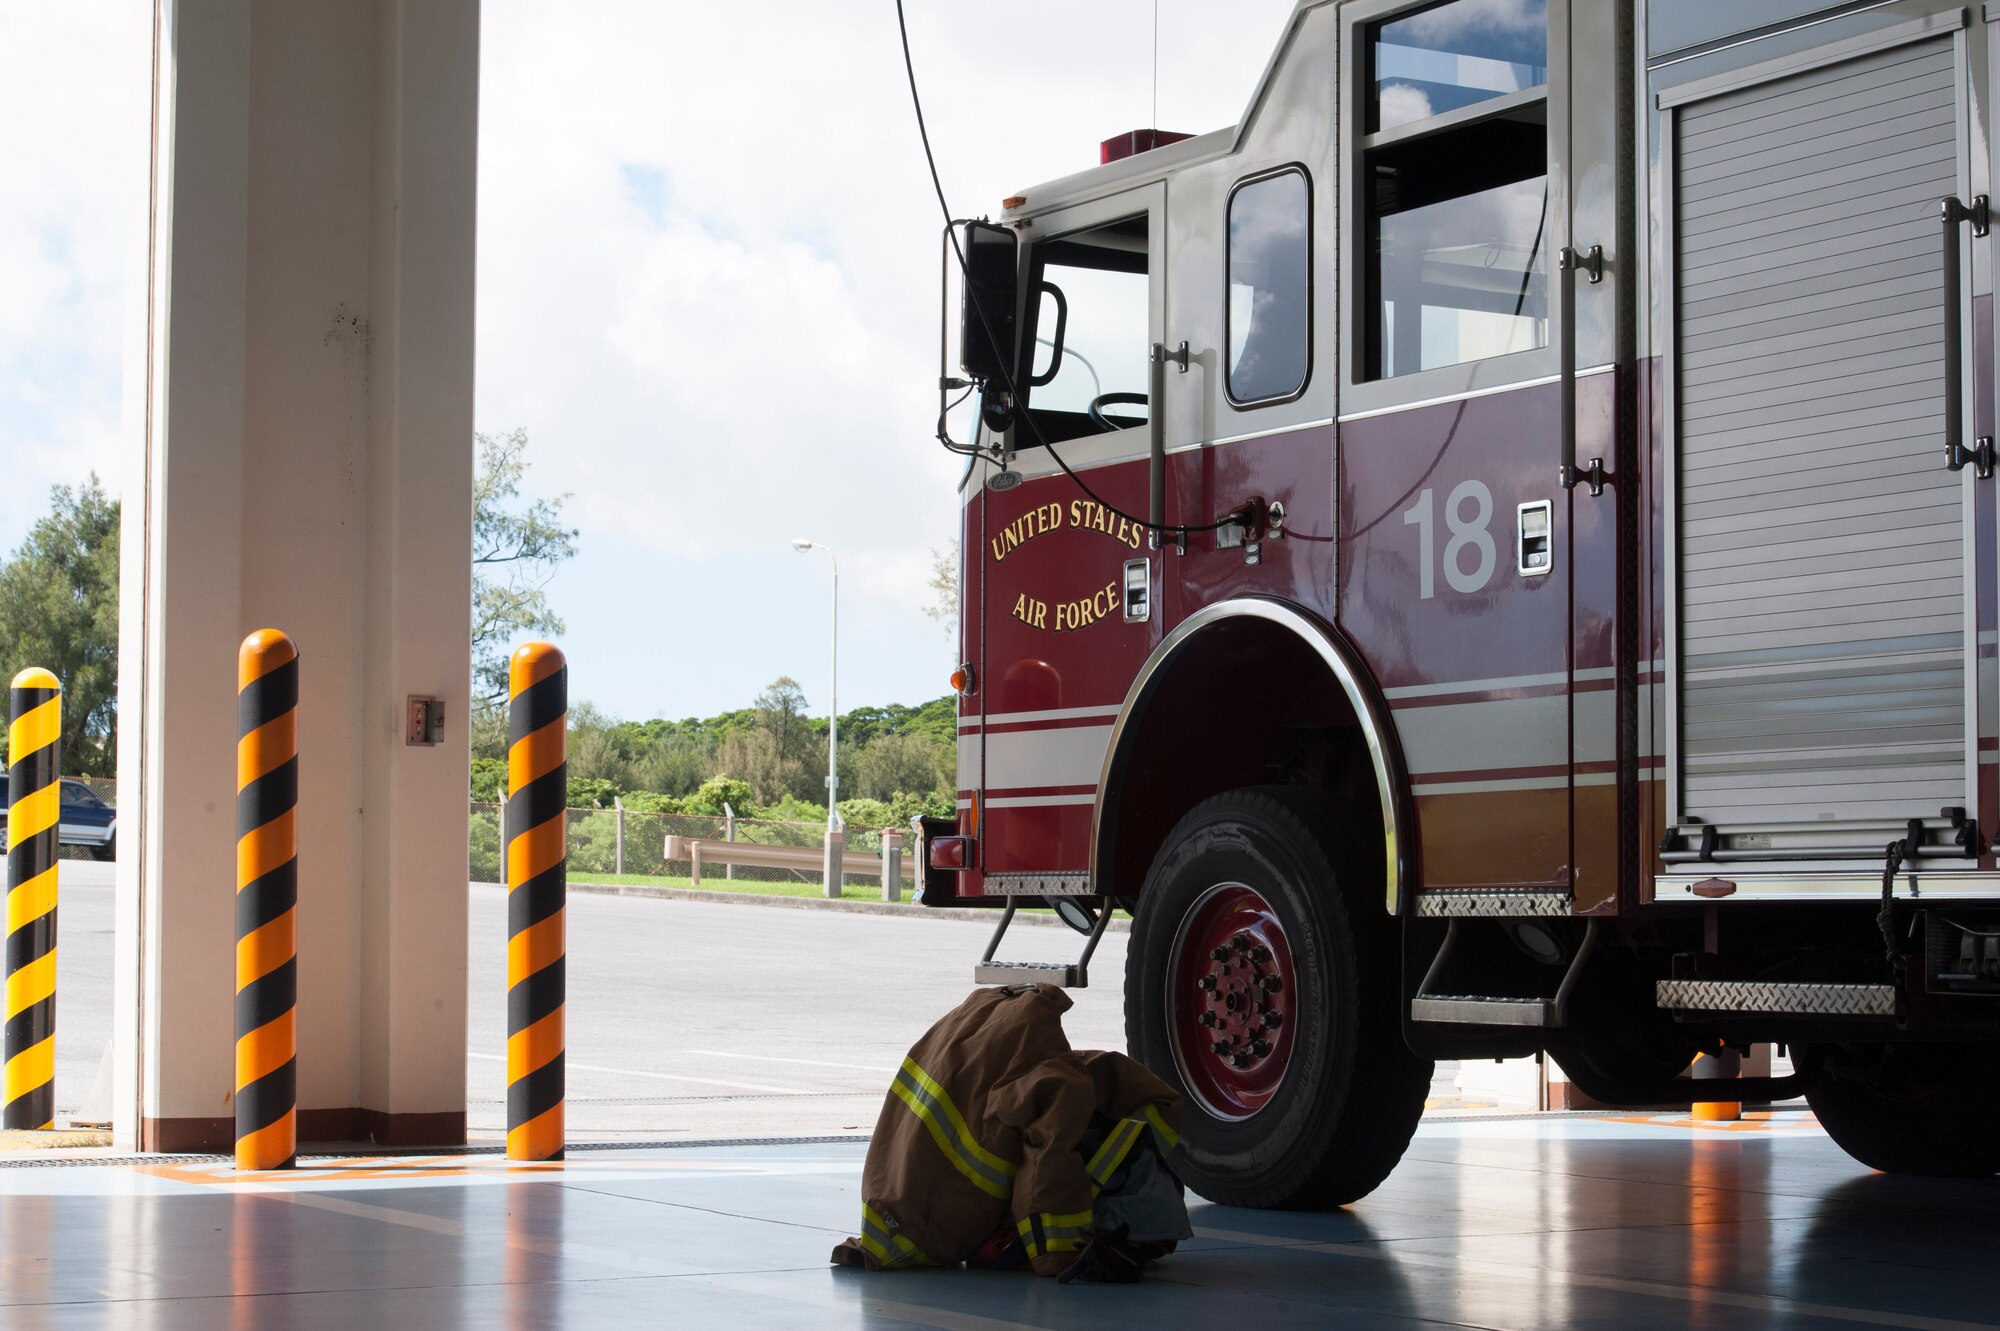 A U.S. Air Force 18th Civil Engineer Squadron firetruck sits ready for possible emergencies June 28, 2017, at Kadena Air Base, Japan. The 18th CES provides fire response services across Kadena, responding to inflight emergencies and domestic fires. (U.S Air Force photo by Senior Airman Quay Drawdy)